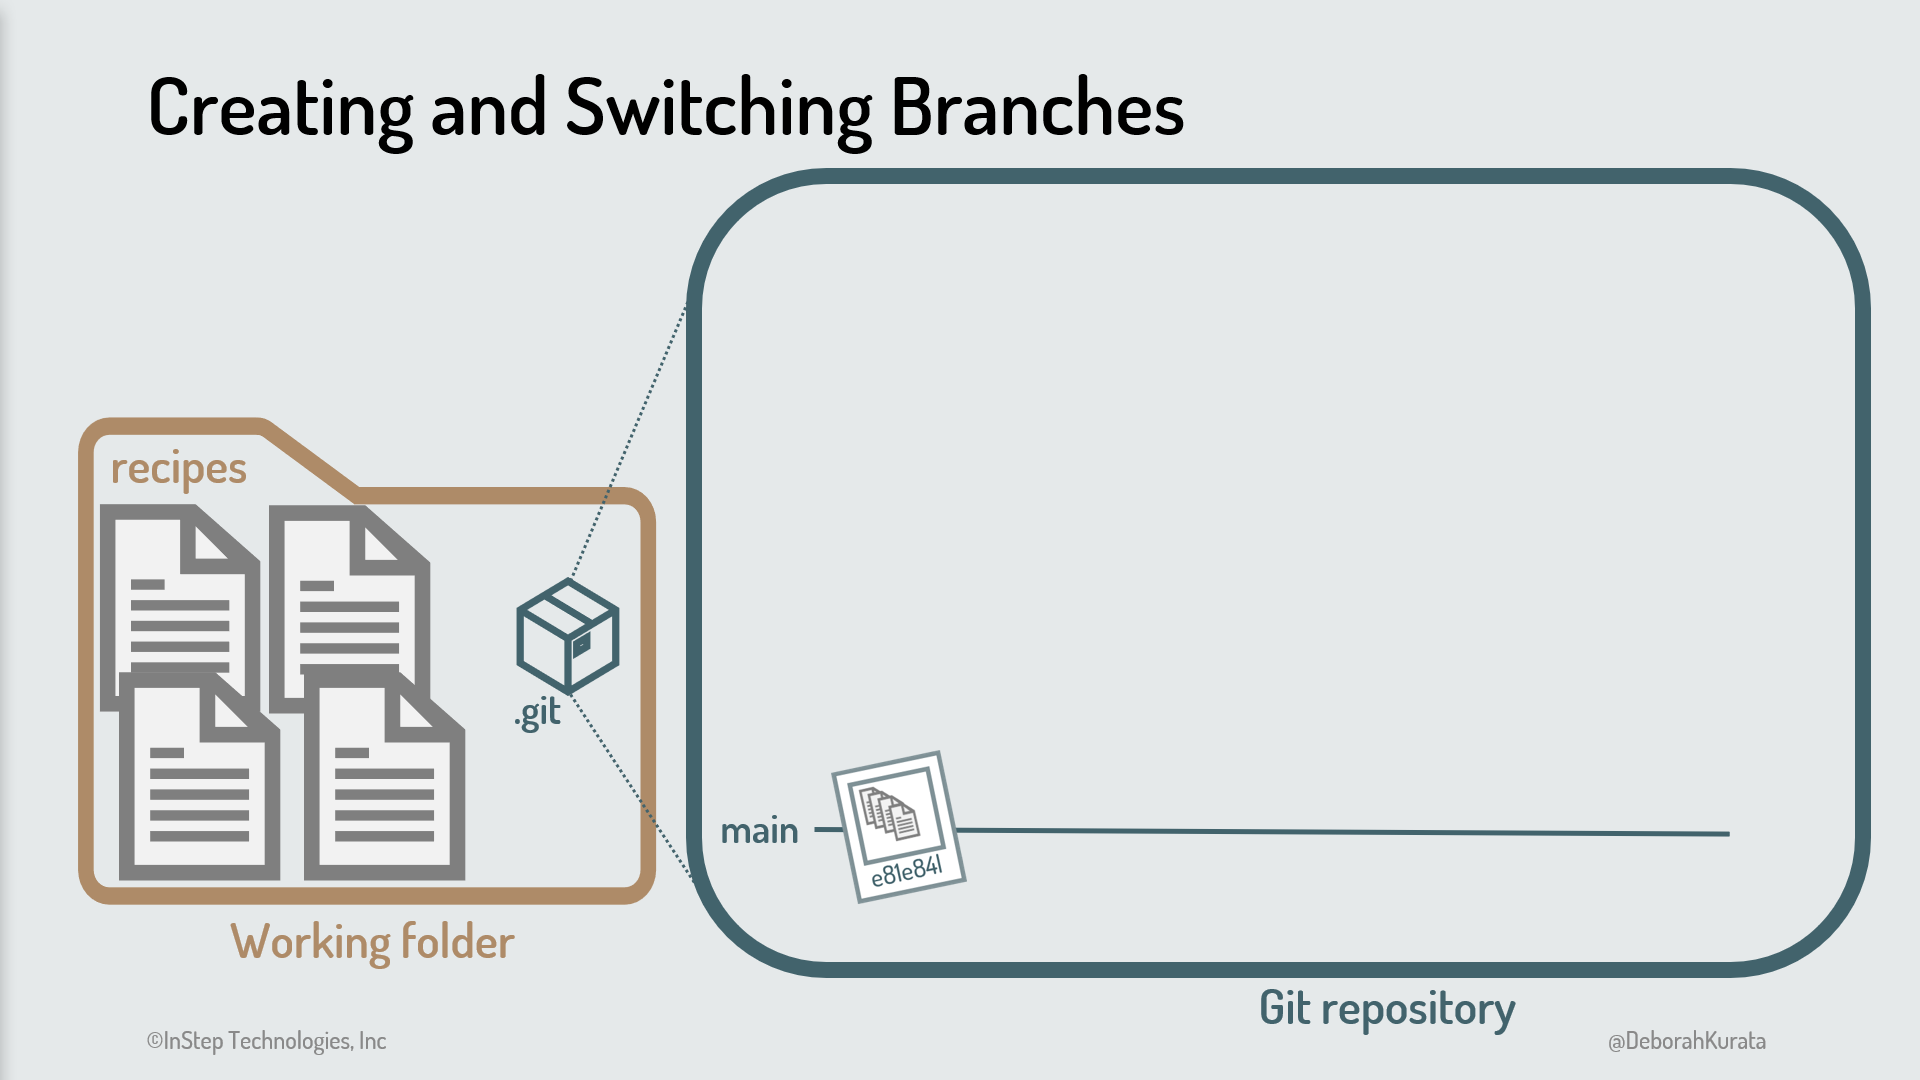 Working folder on the left. Git repository with the main branch on the right.